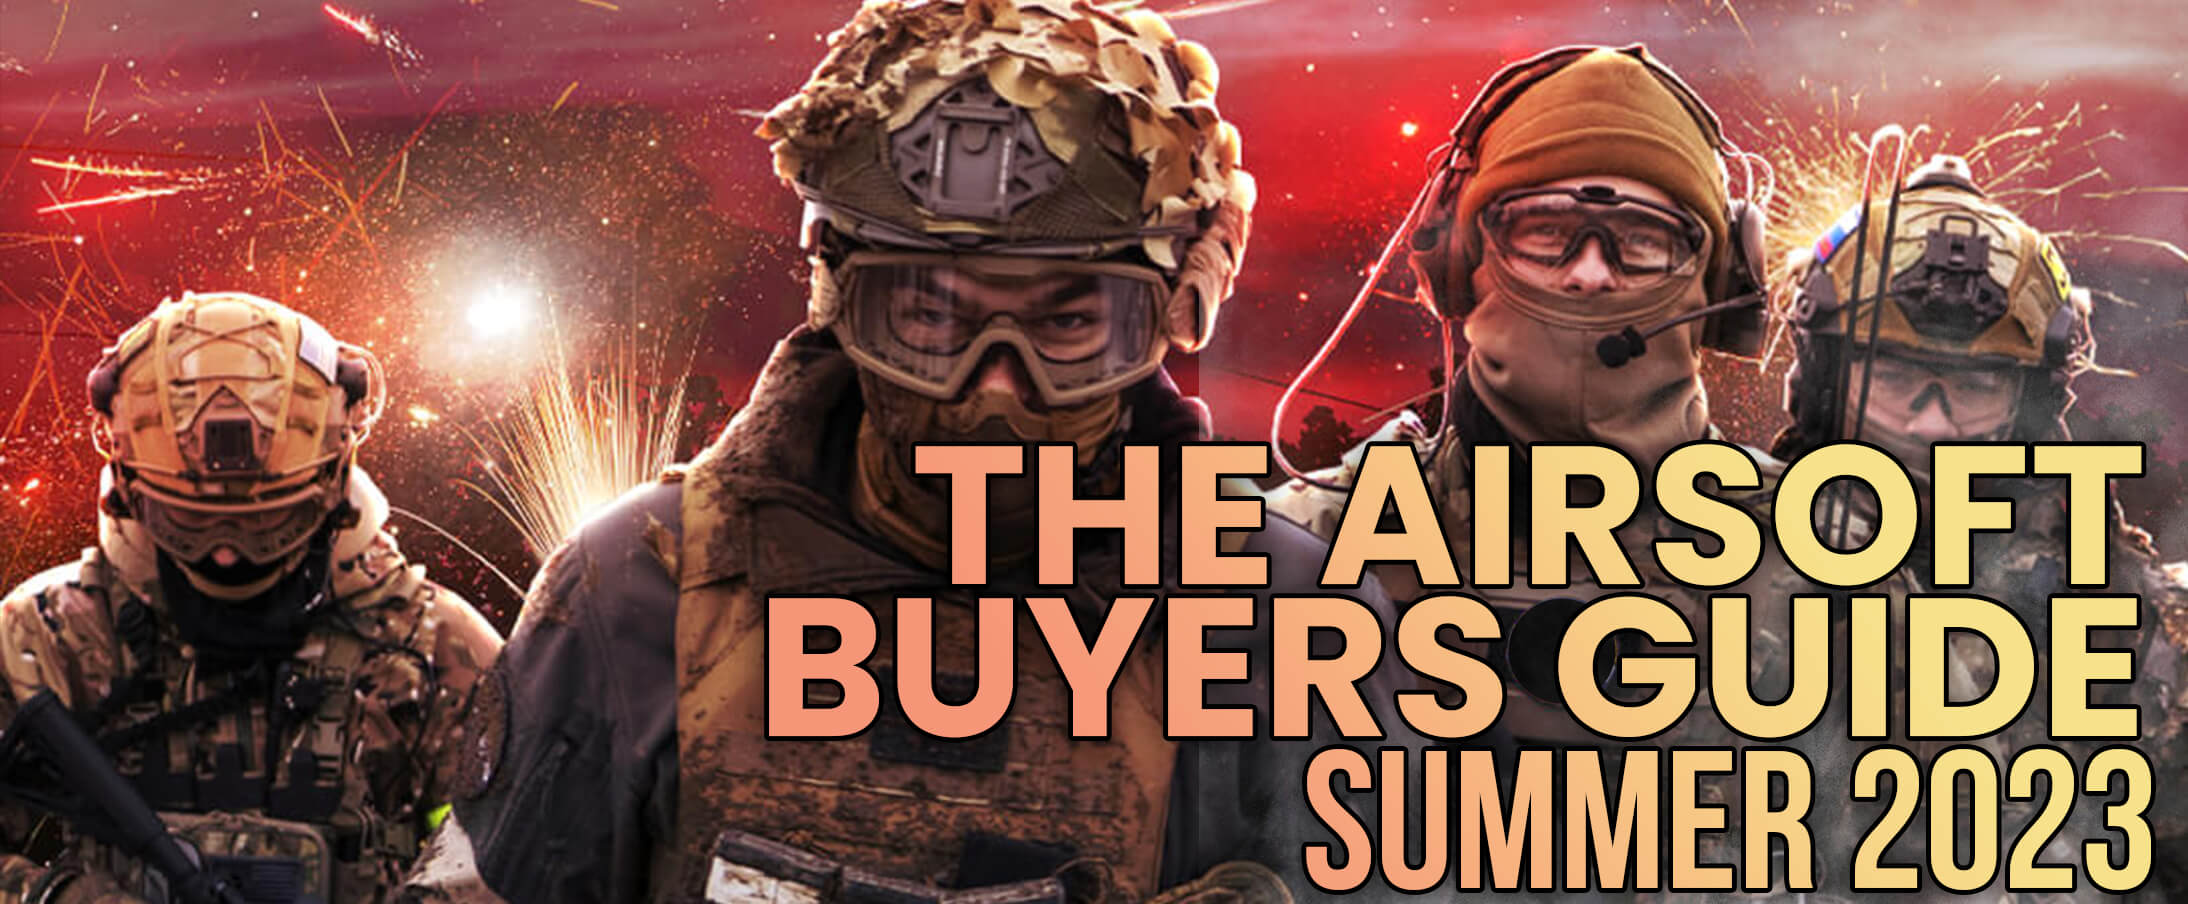 Airsoft Buyers Guide for Summer 2023